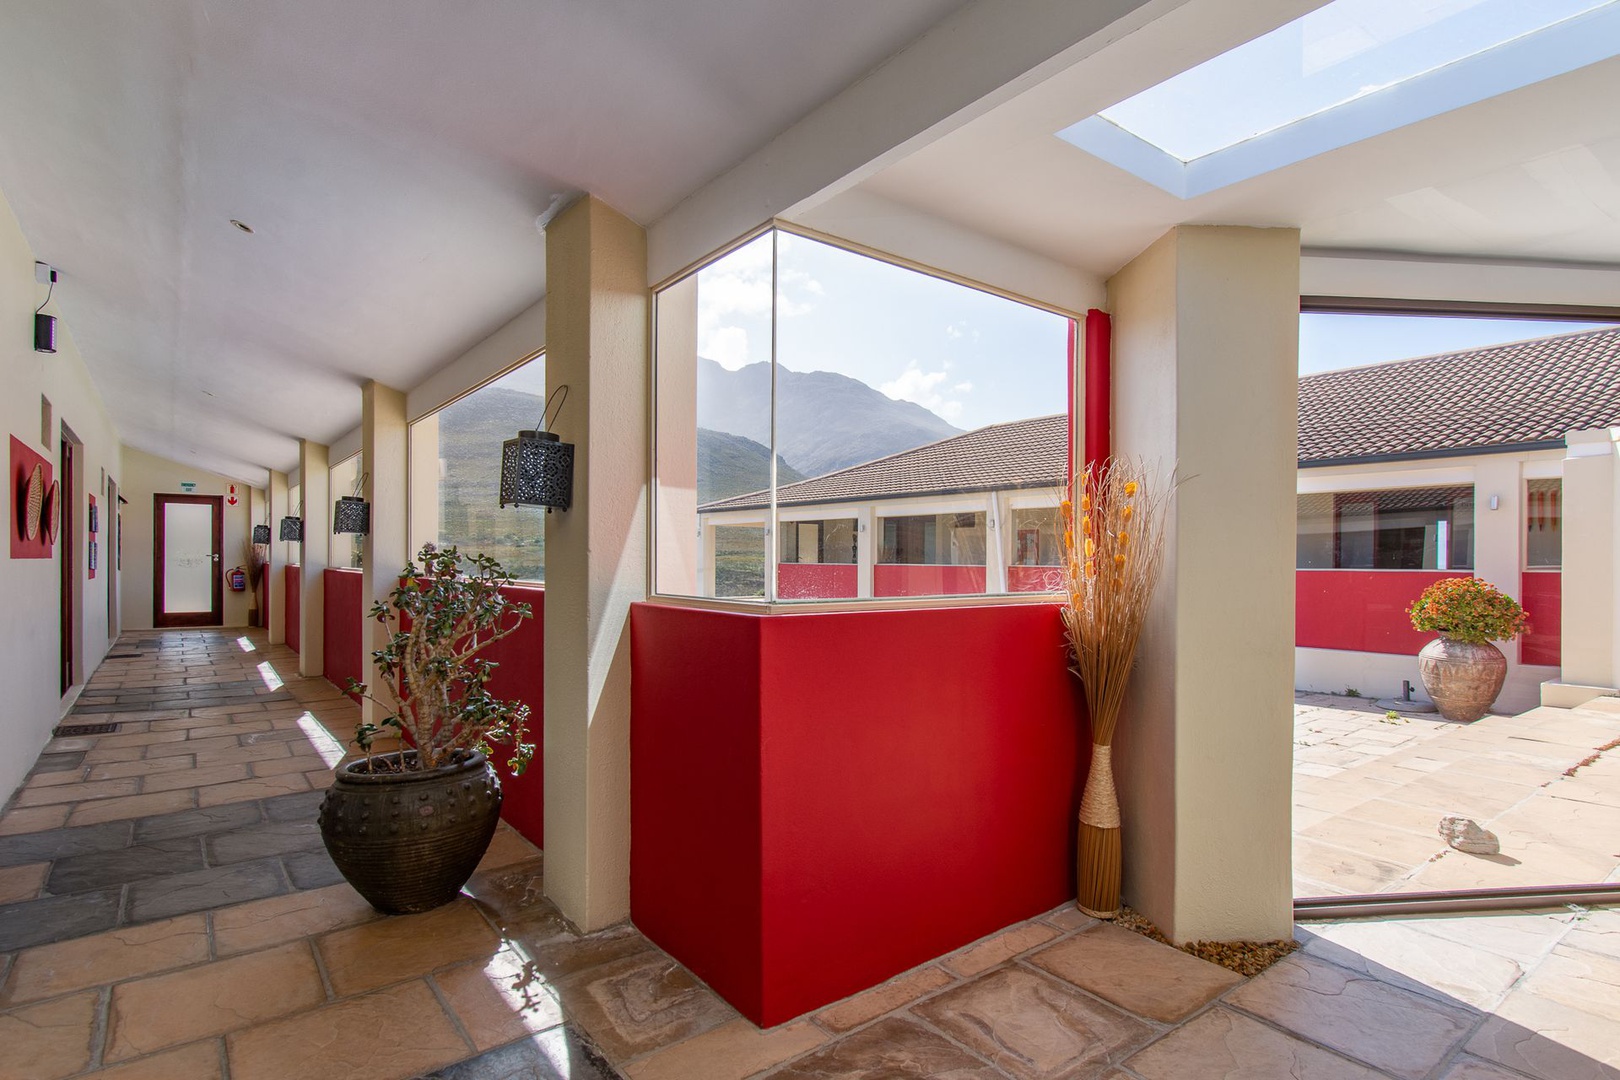 House in Pringle Bay Rural - Rooms lead to the enclosed veranda surrounding the pool terrace